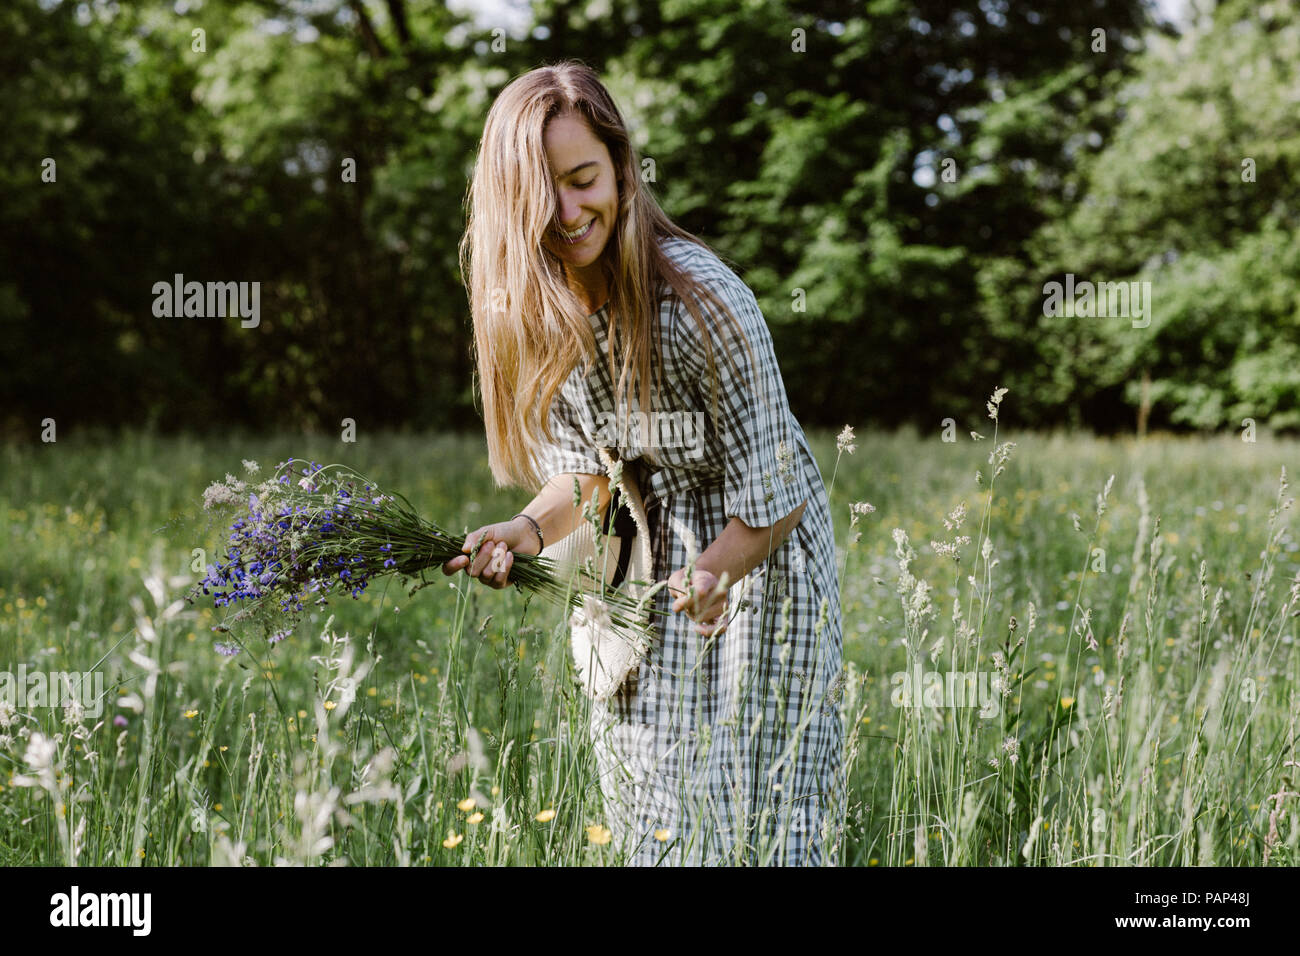 Italy, Veneto, Young woman plucking flowers and herbs in field Stock Photo